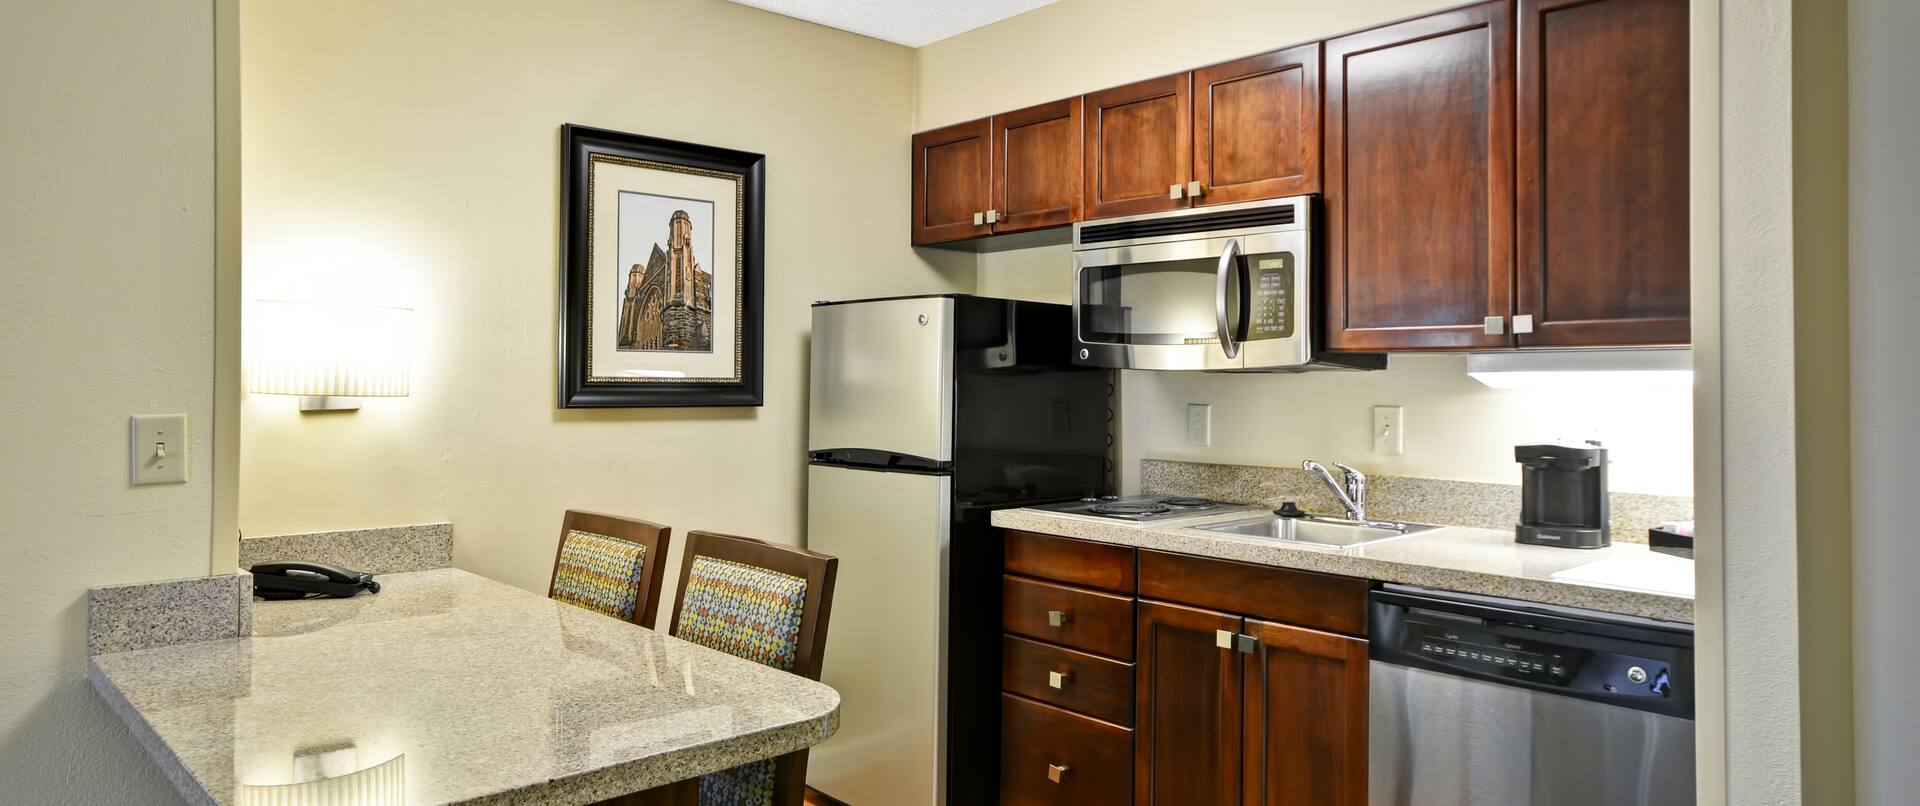 Guest Suite Kitchen Area with Refridgerator, Microwave and Dishwasher